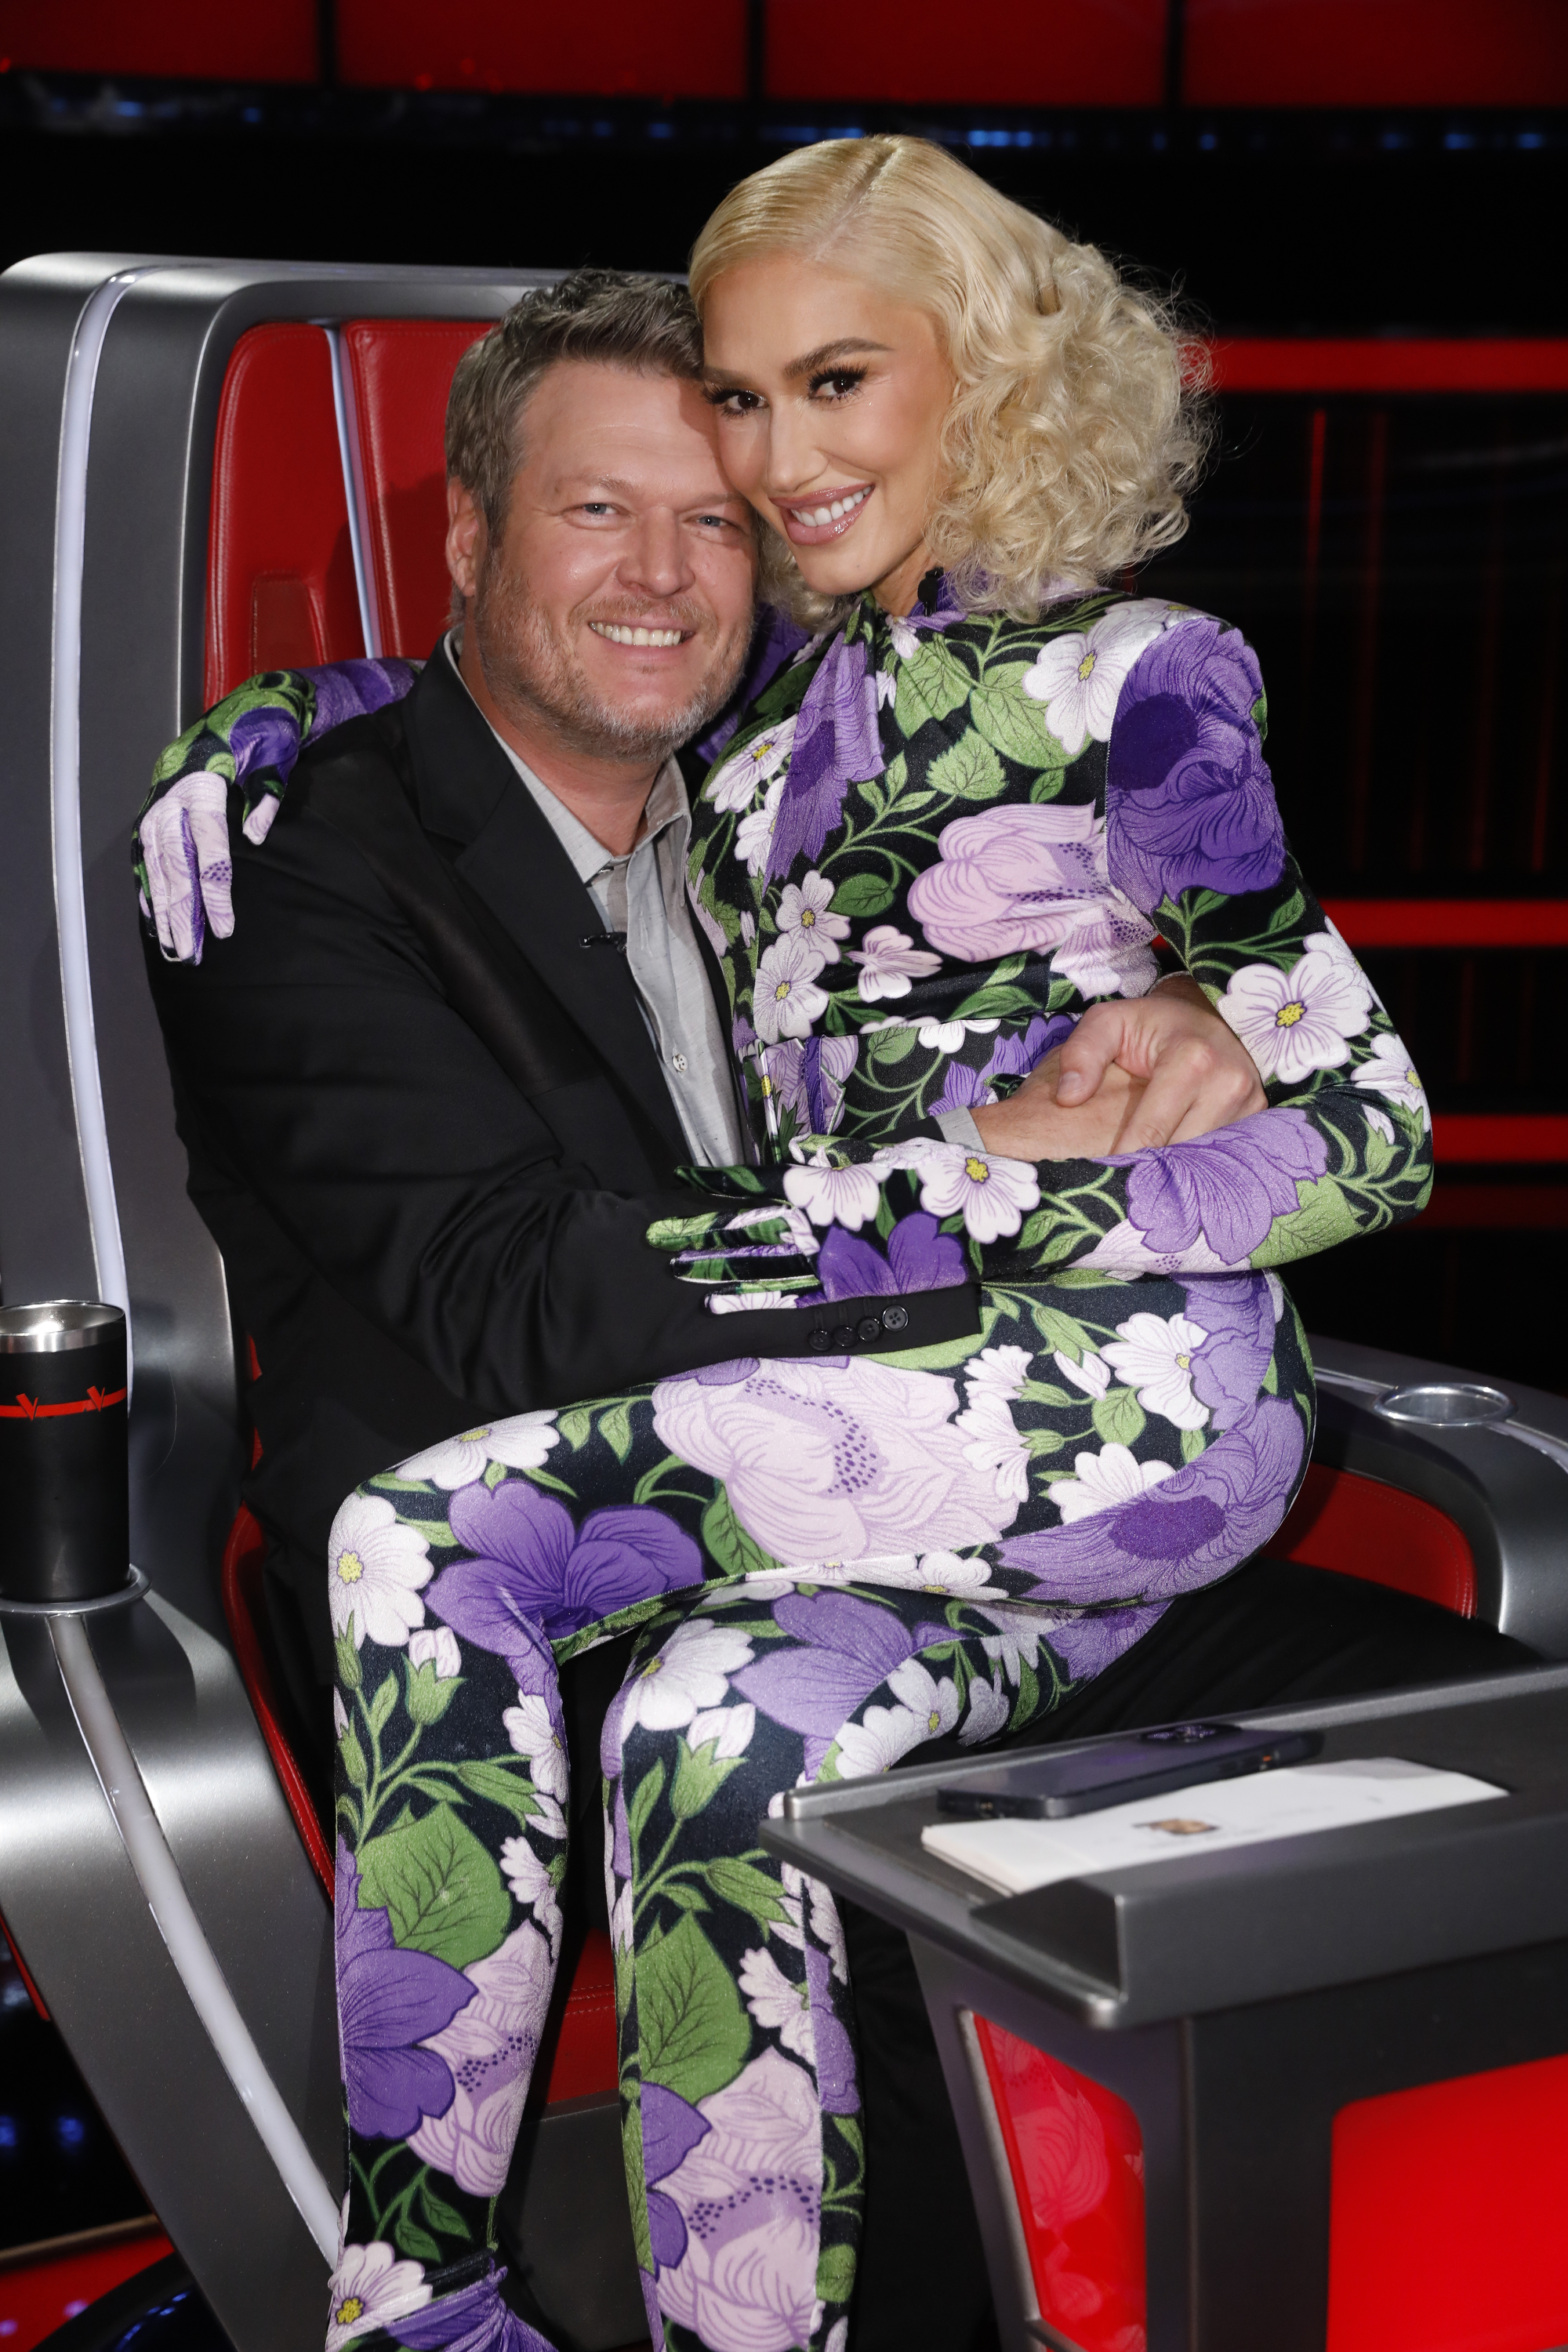 The couple met on The Voice where they both acted as coaches